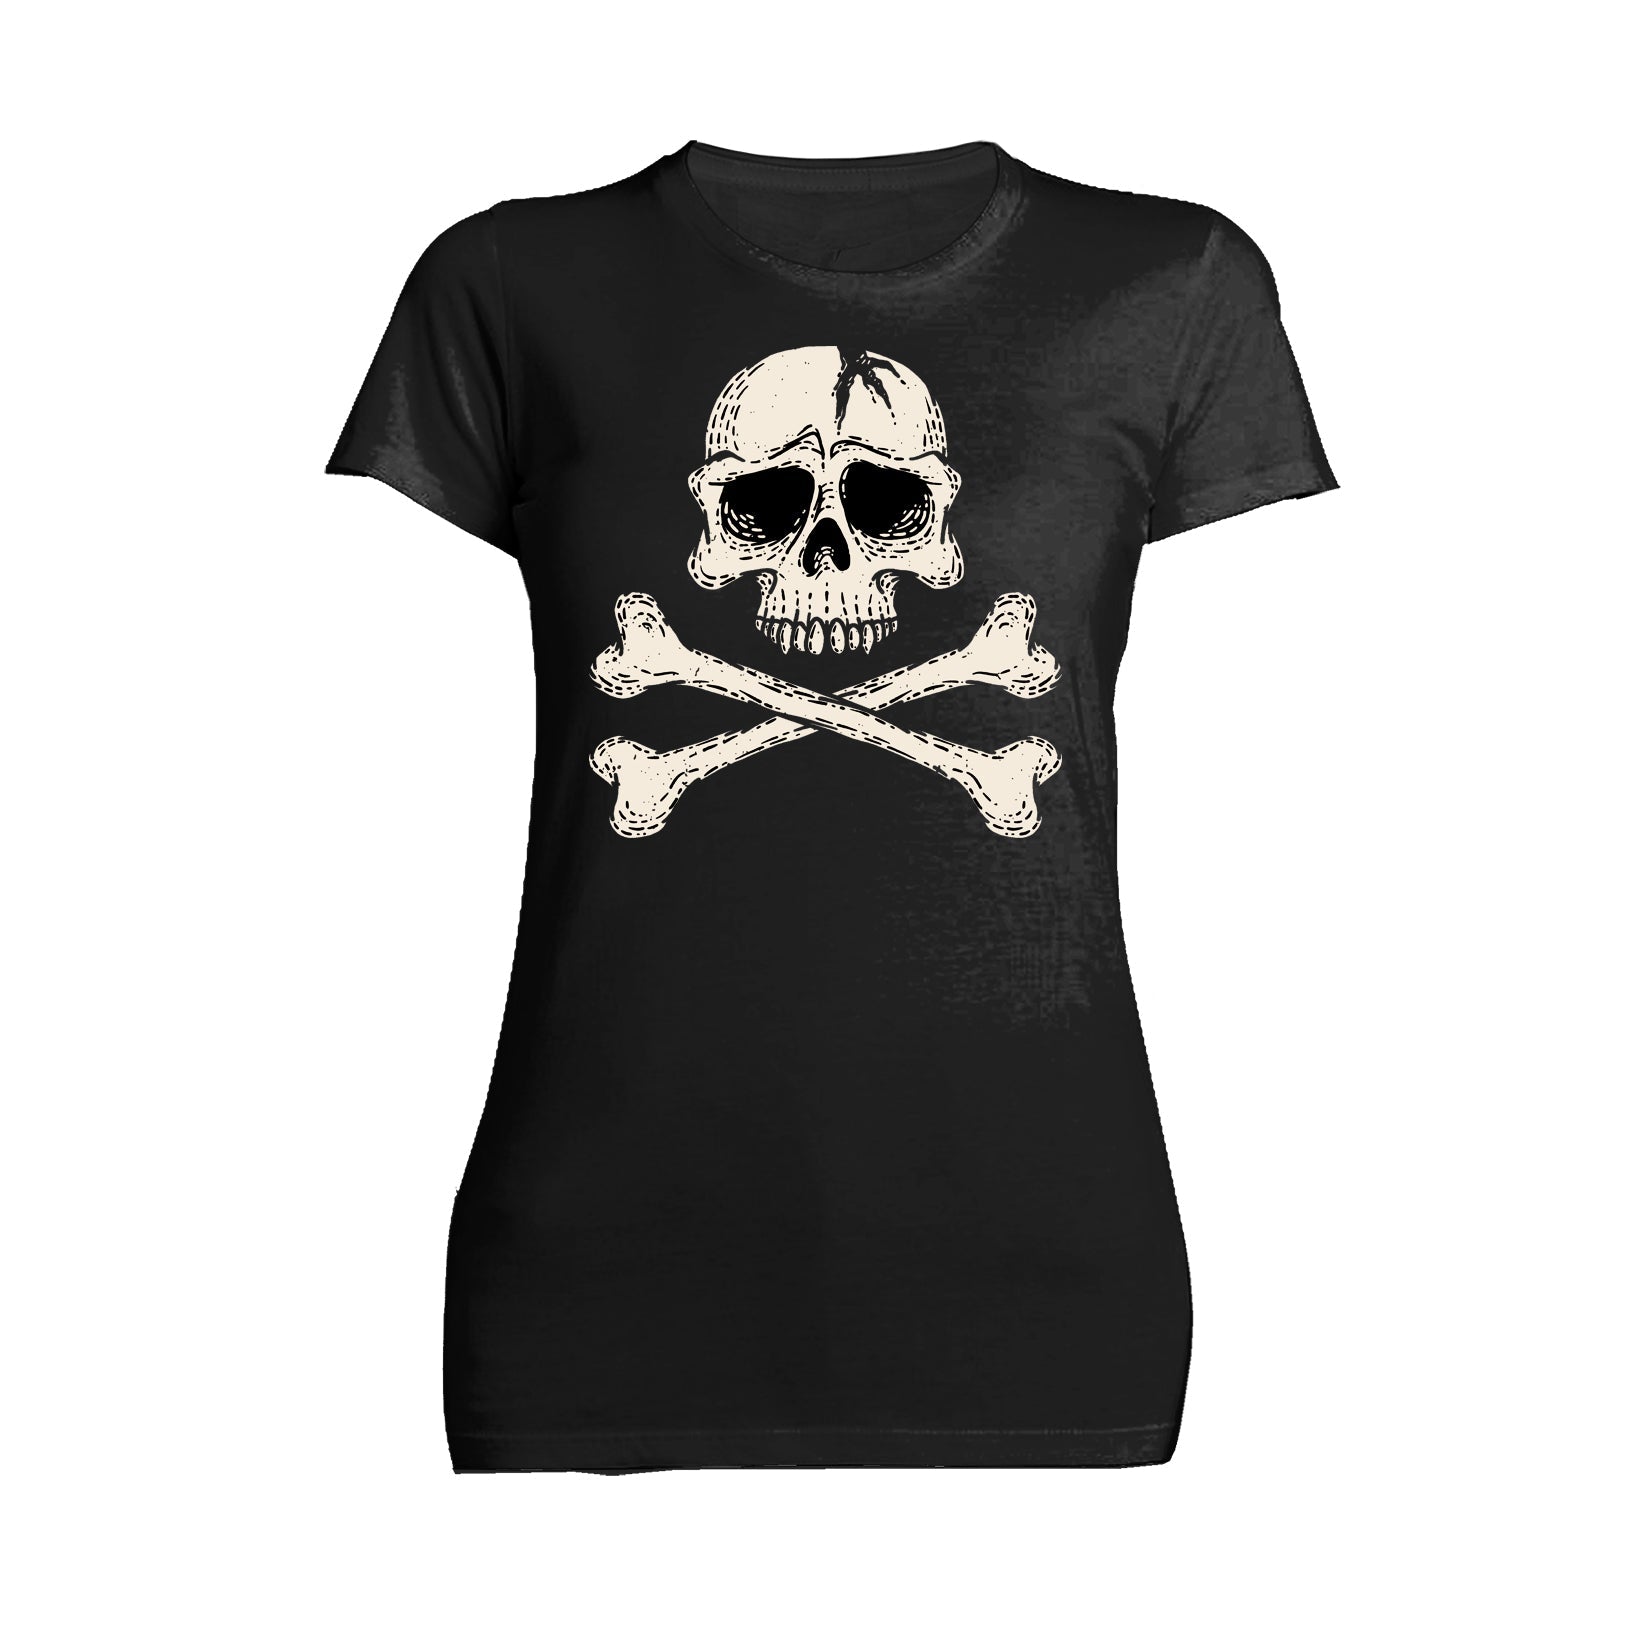 Halloween Horror Pirate Skull And Crossbones Edgy Cool Scary Official Women's T-shirt